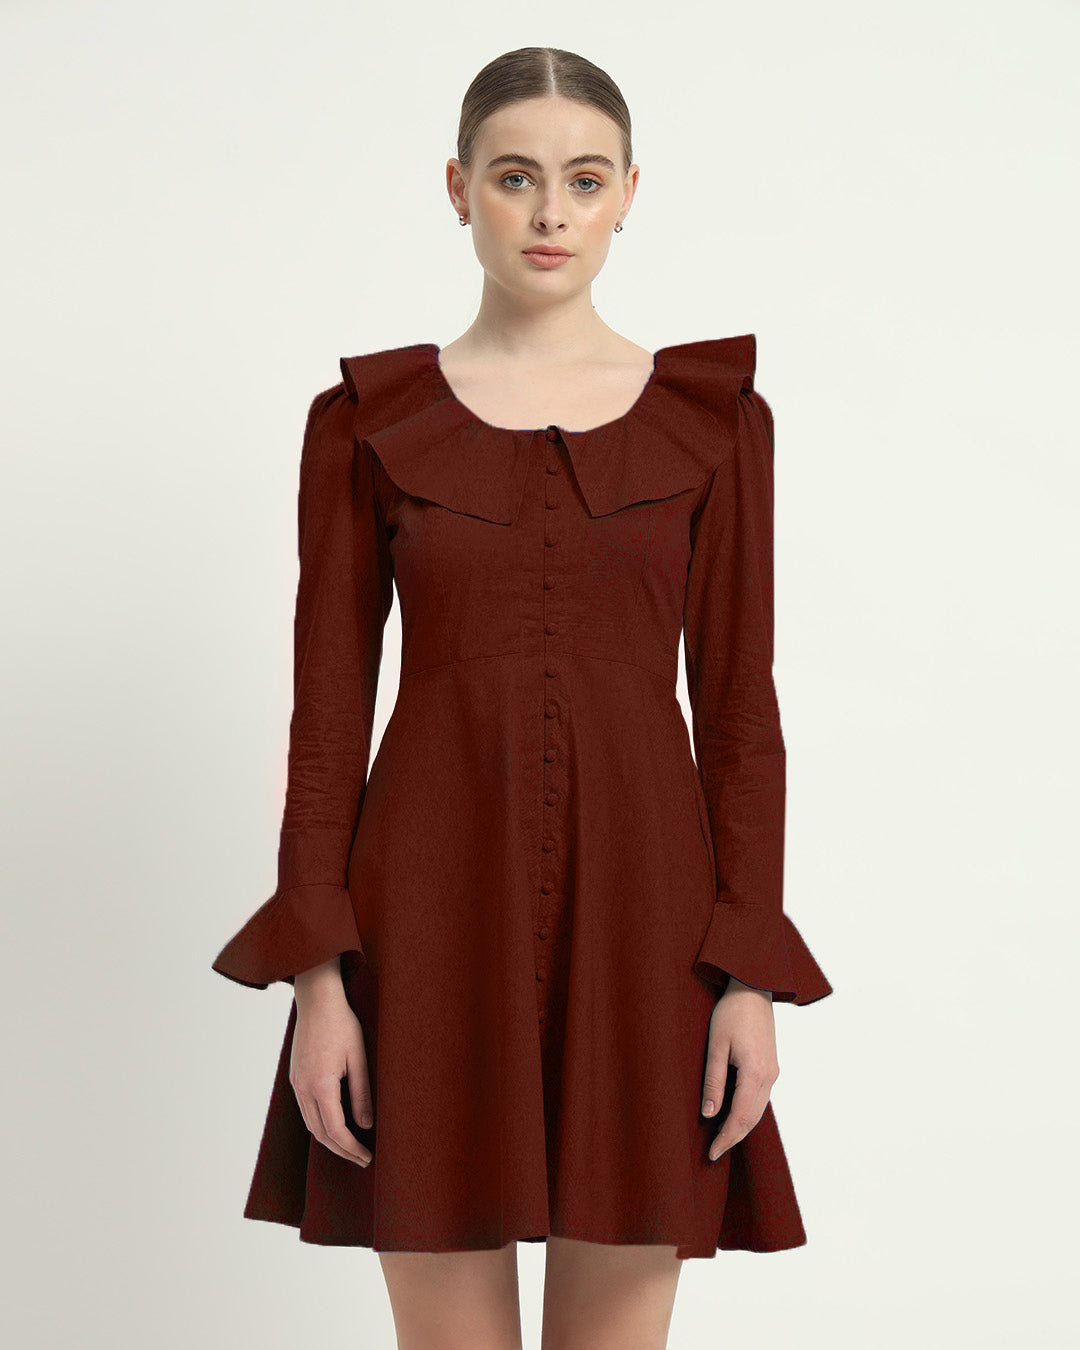 The Fredonia Rouge Cotton Dress